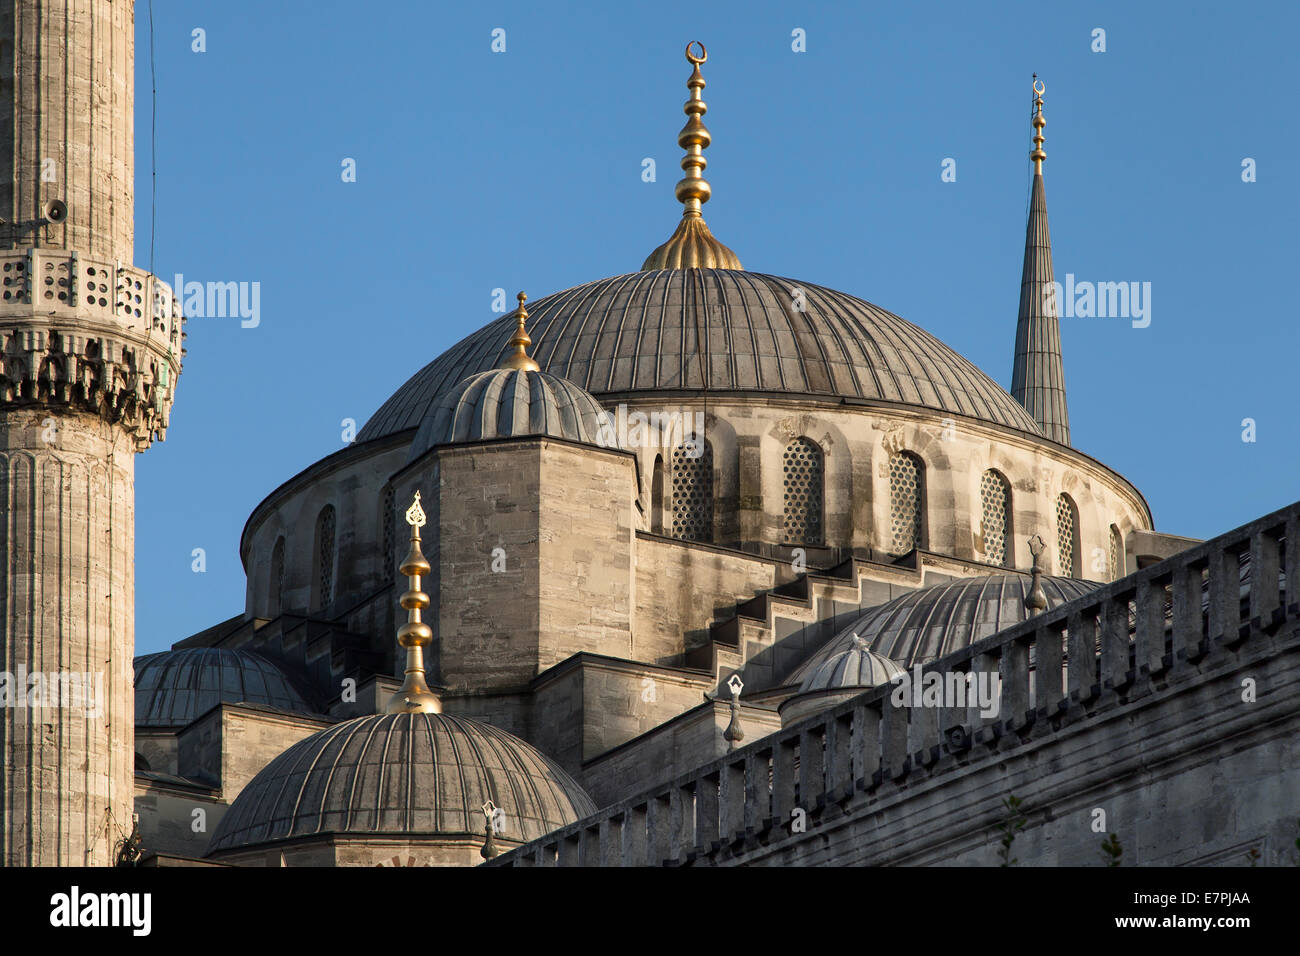 Dome of the Sultanahmet Mosque in Istanbul, Turkey. Stock Photo